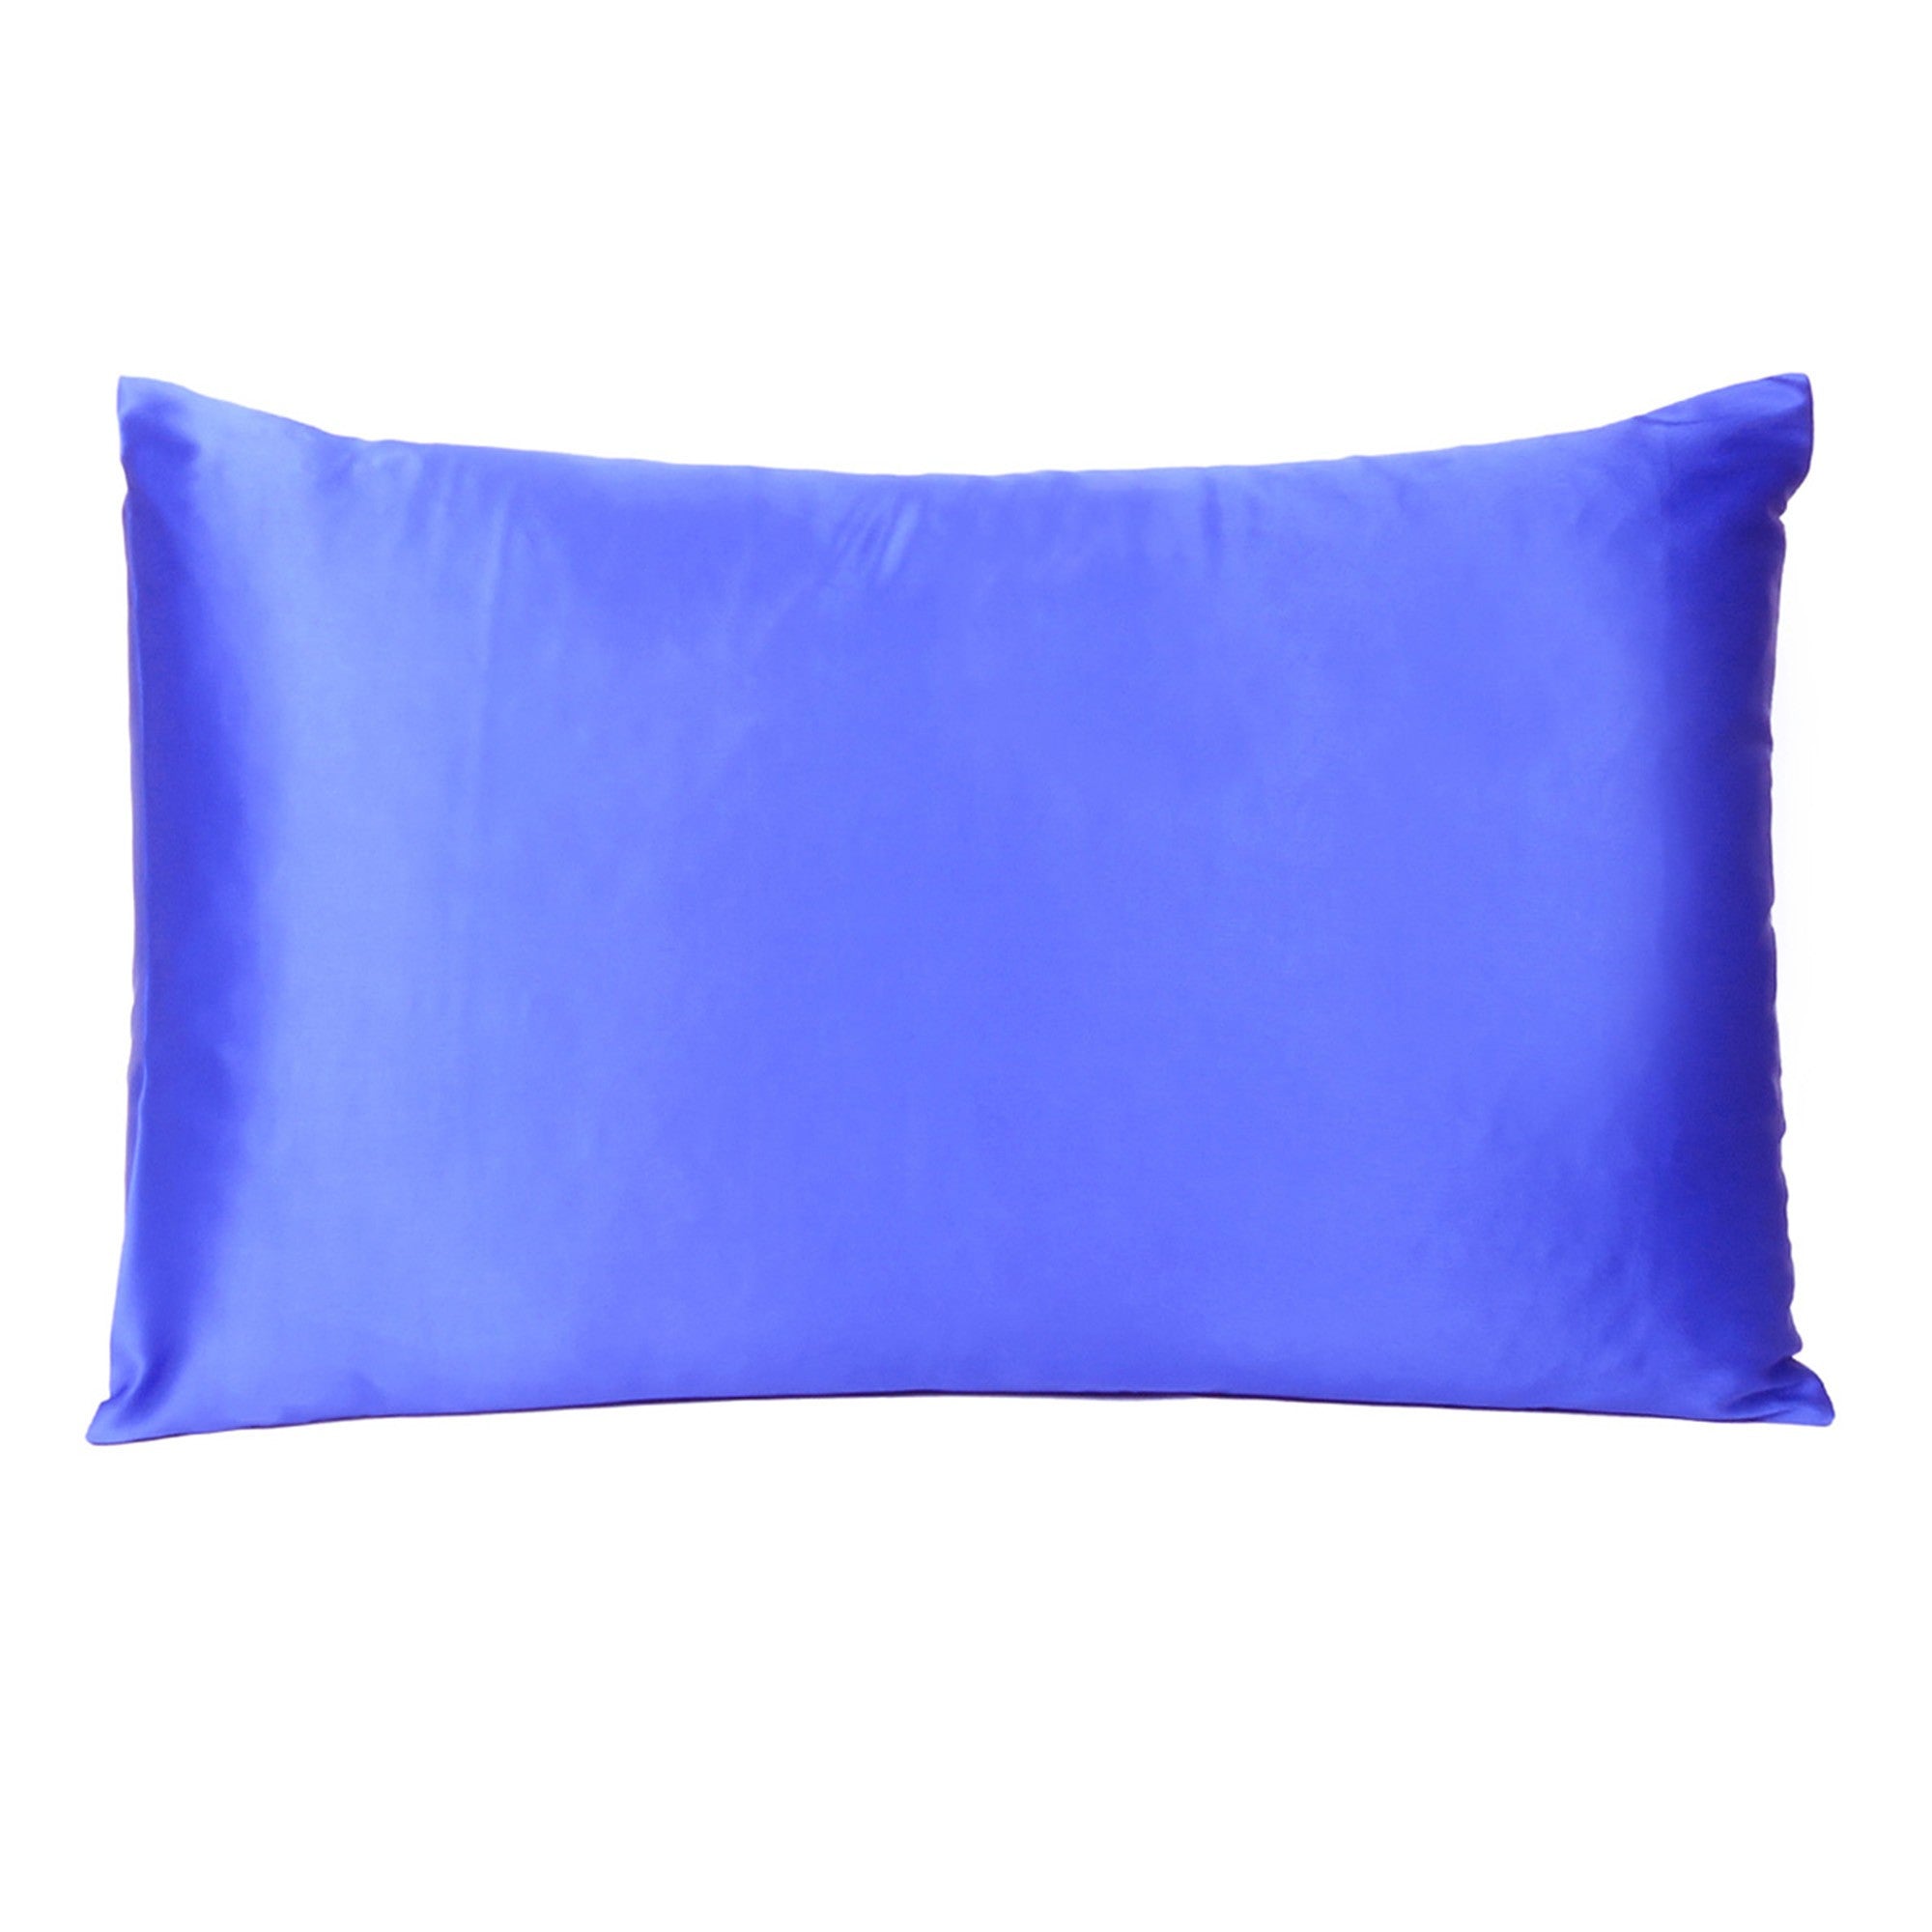 Royal Blue Dreamy Set Of 2 Silky Satin Queen Pillowcases - Tuesday Morning-Bed Sheets